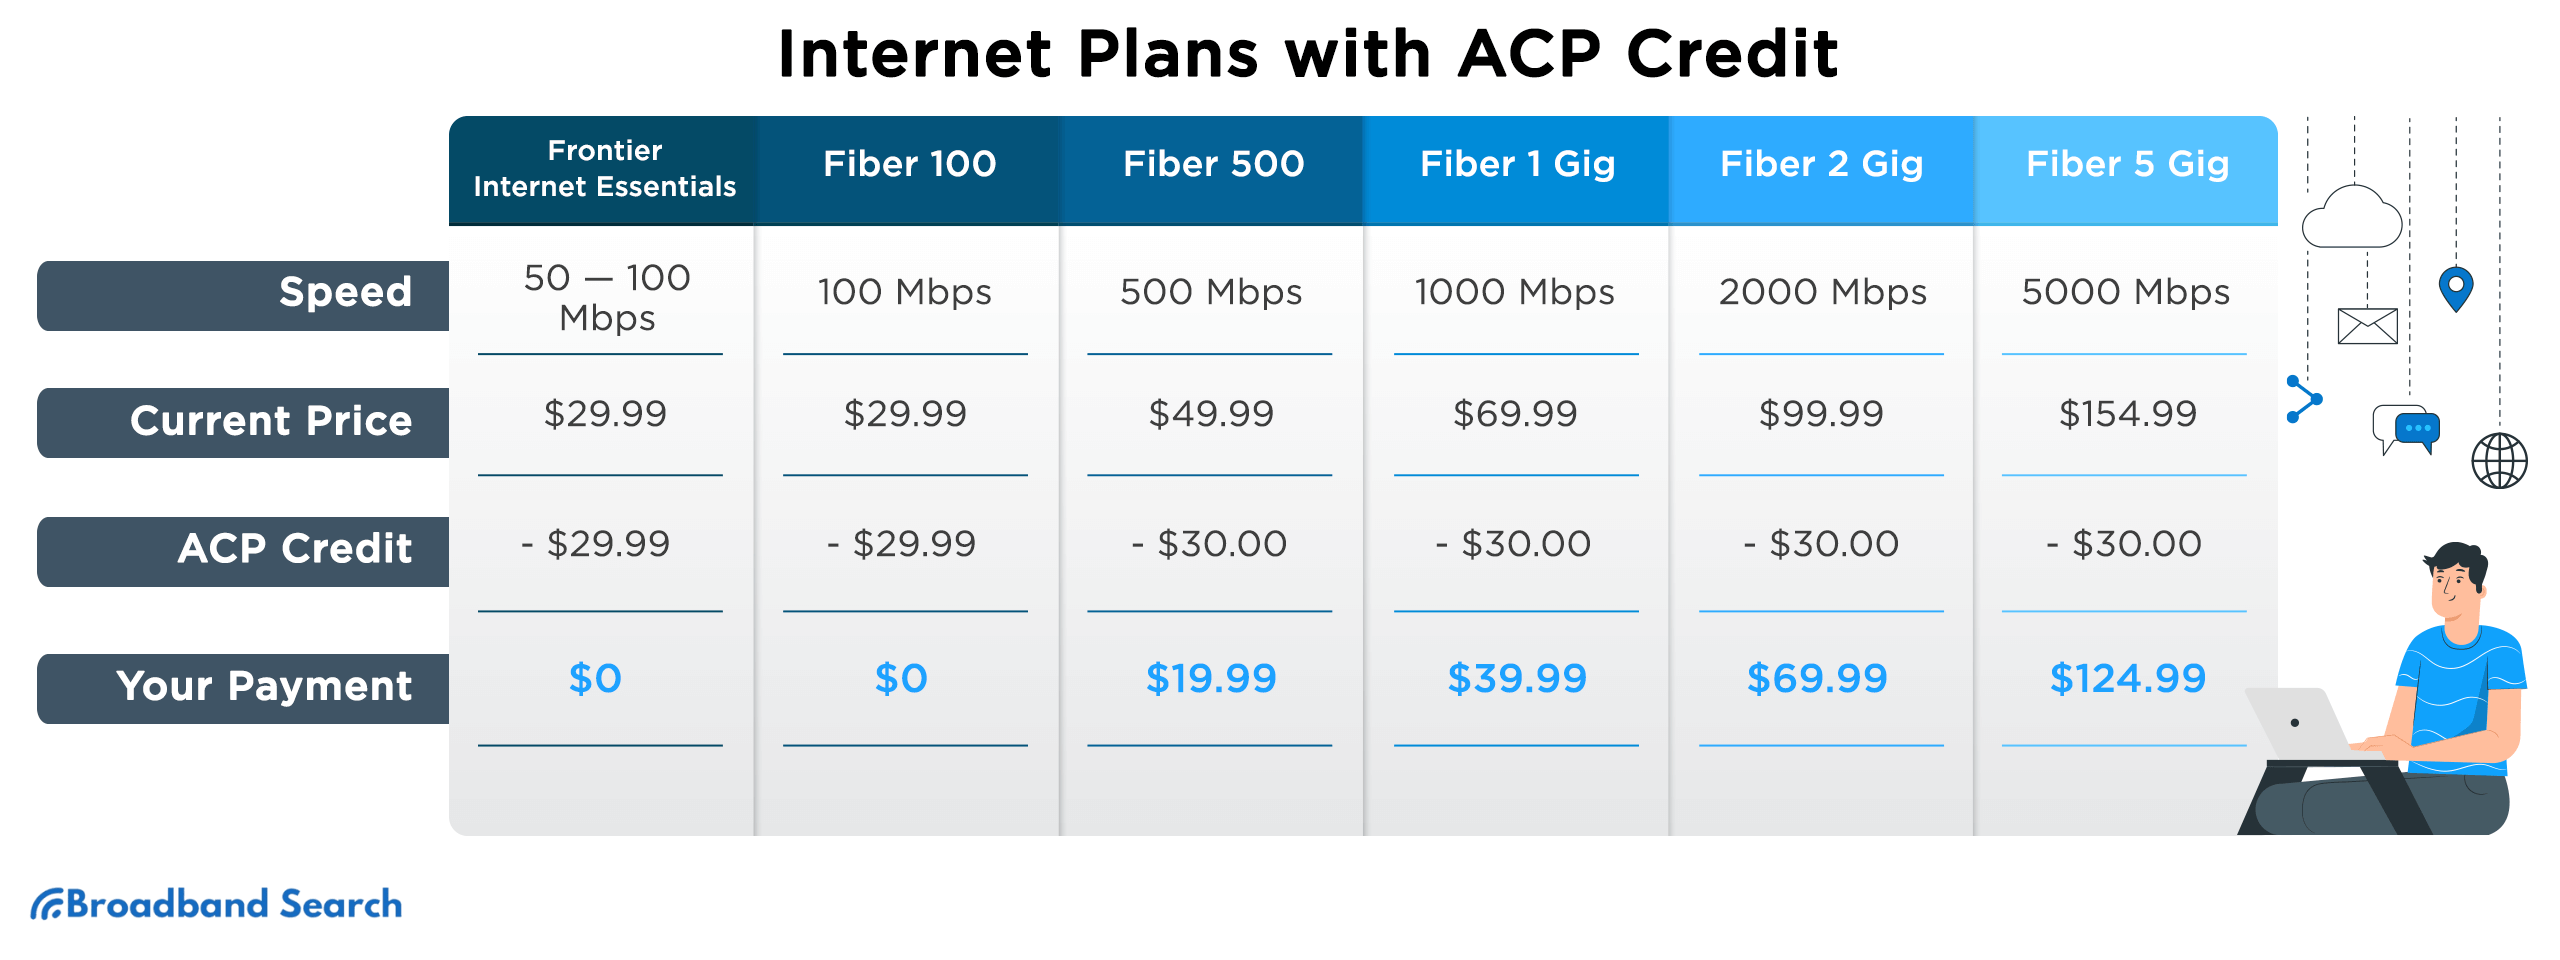 Fixed and Low Income Internet Plans and Deals